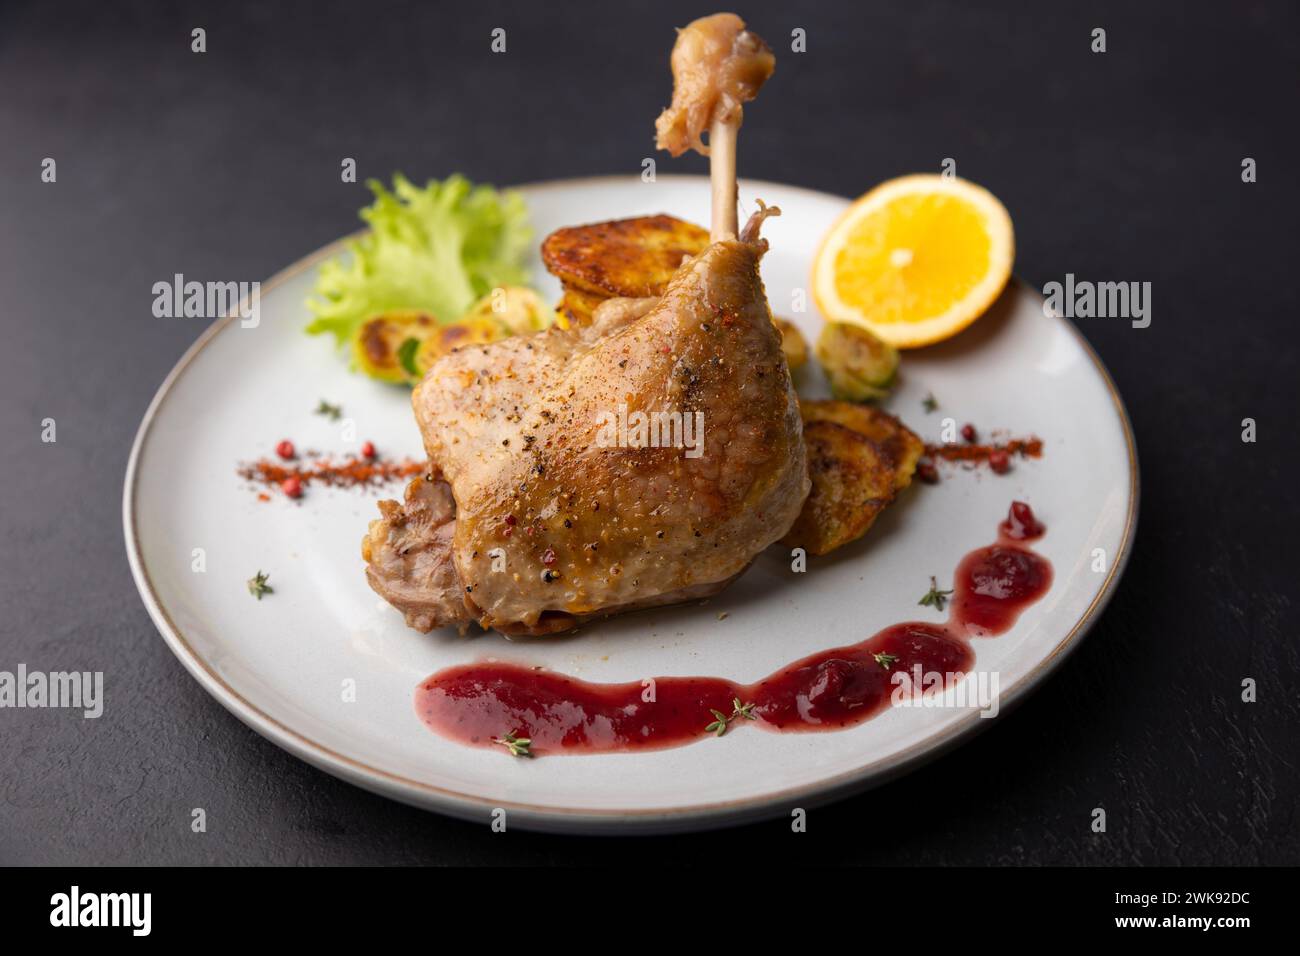 Duck leg confit with Brussels sprouts, baked potatoes, thyme, orange and lingonberry sauce. Traditional French cuisine. Selective focus, close-up. Stock Photo